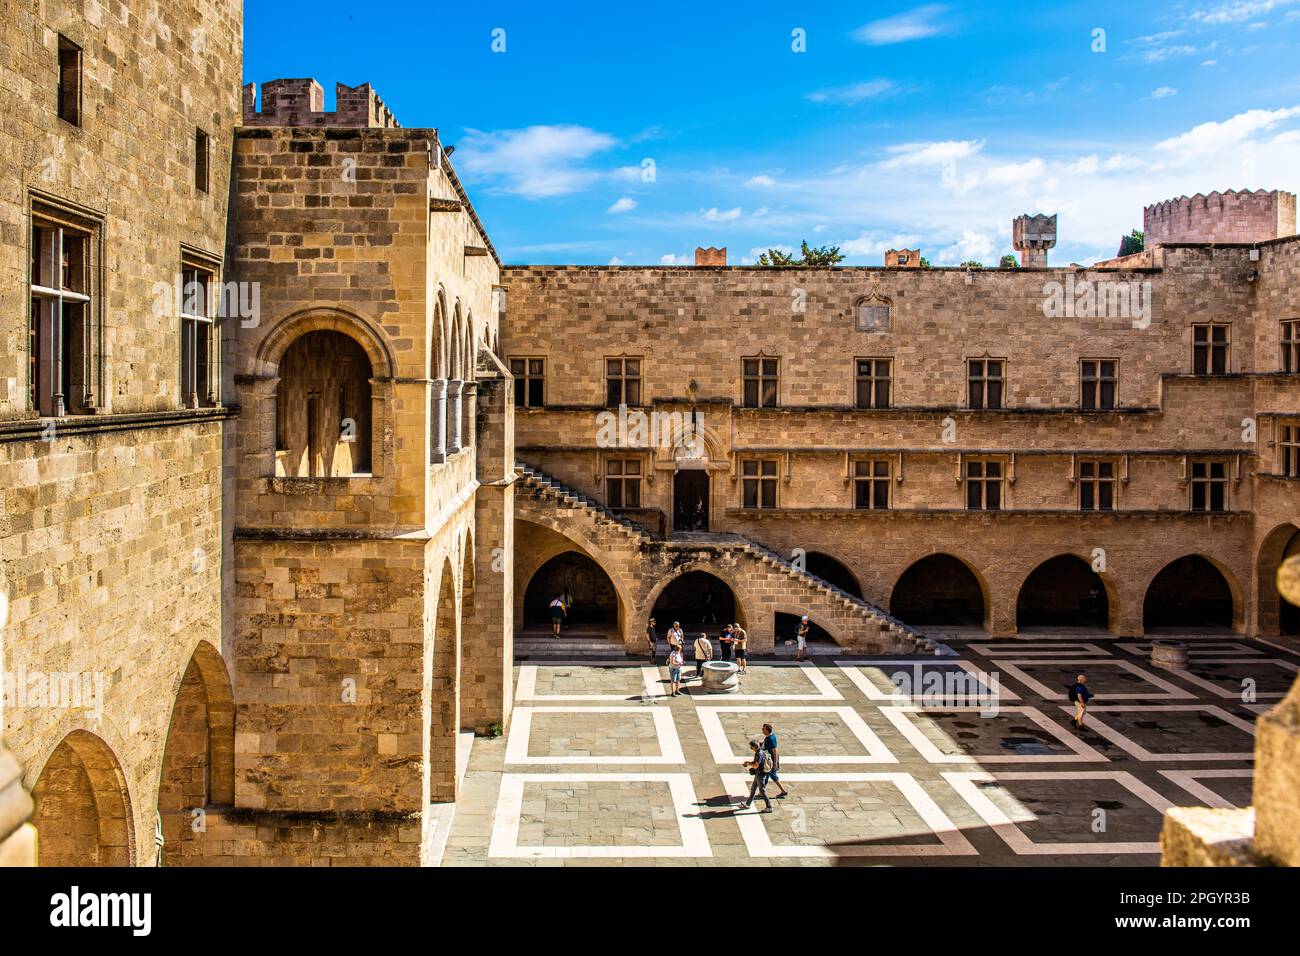 Inner courtyard surrounded by arcades with statues from Hellenistic and Roman times, Grand Masters Palace built in the 14th century by the Johnnite Stock Photo